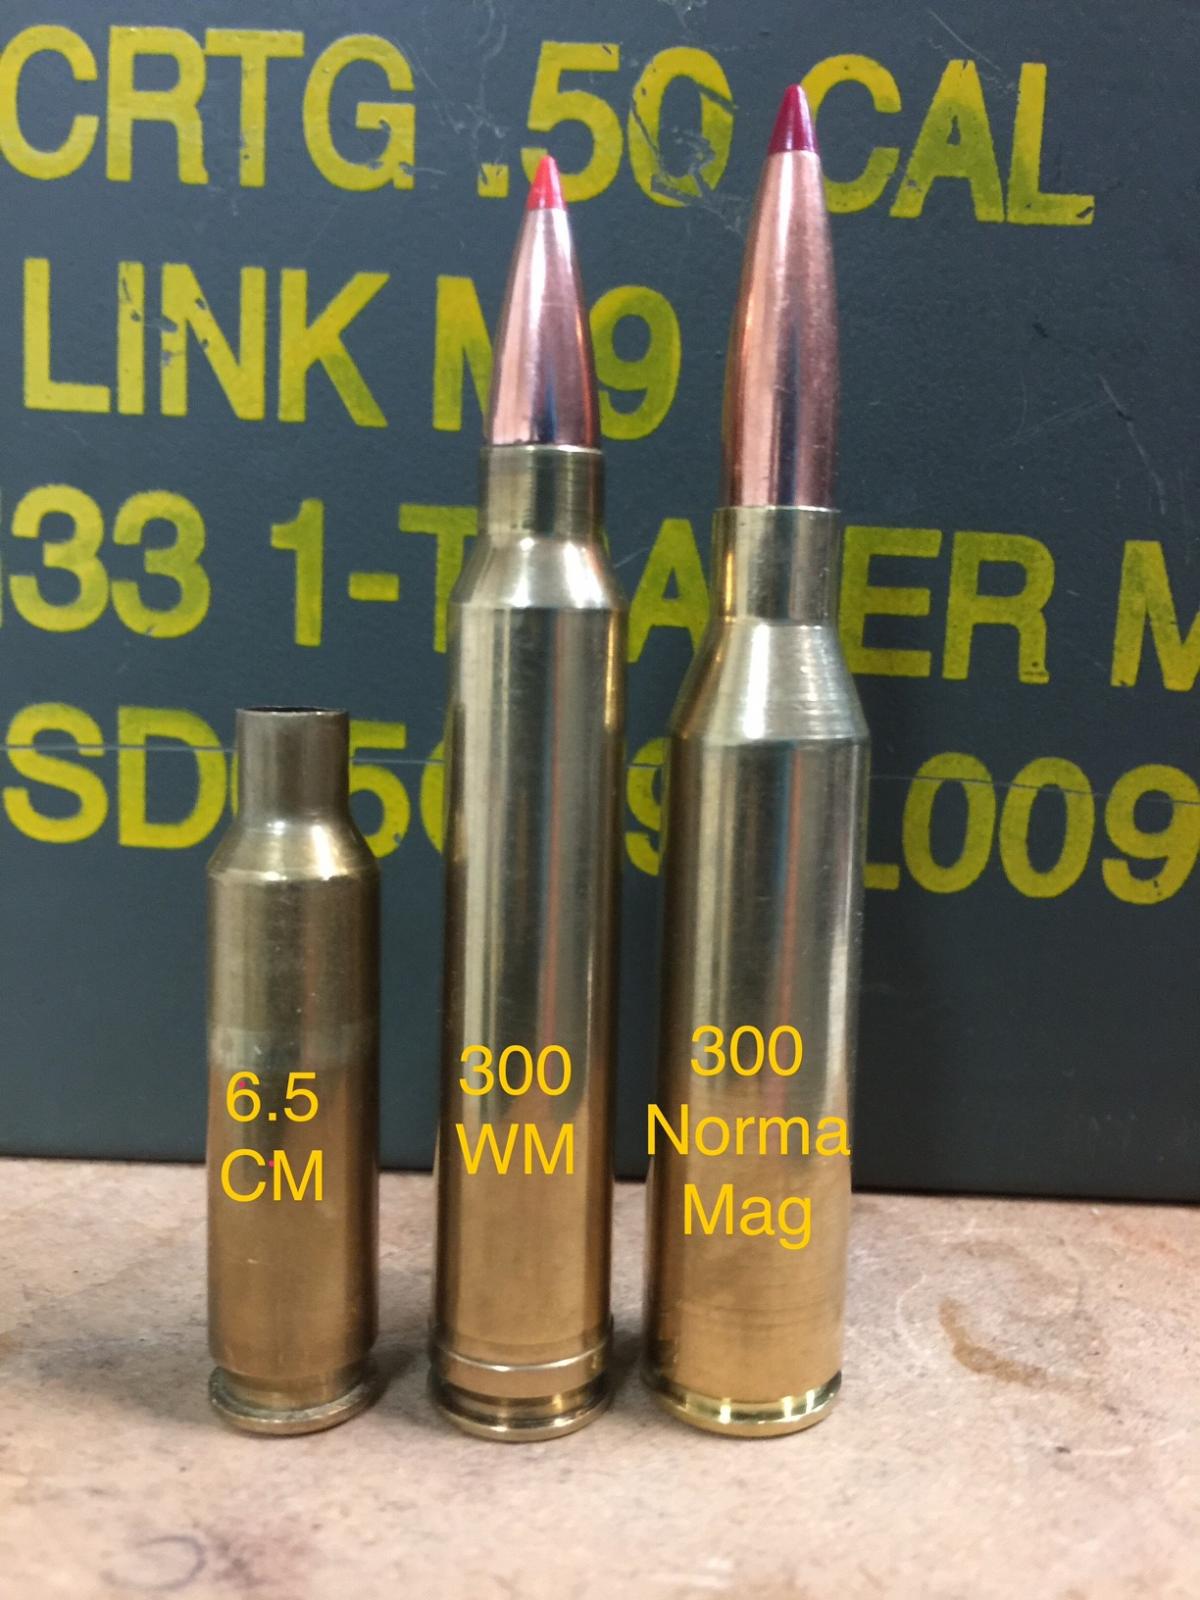 norma 300 mag rifles ammo coueswhitetail classified ads forums